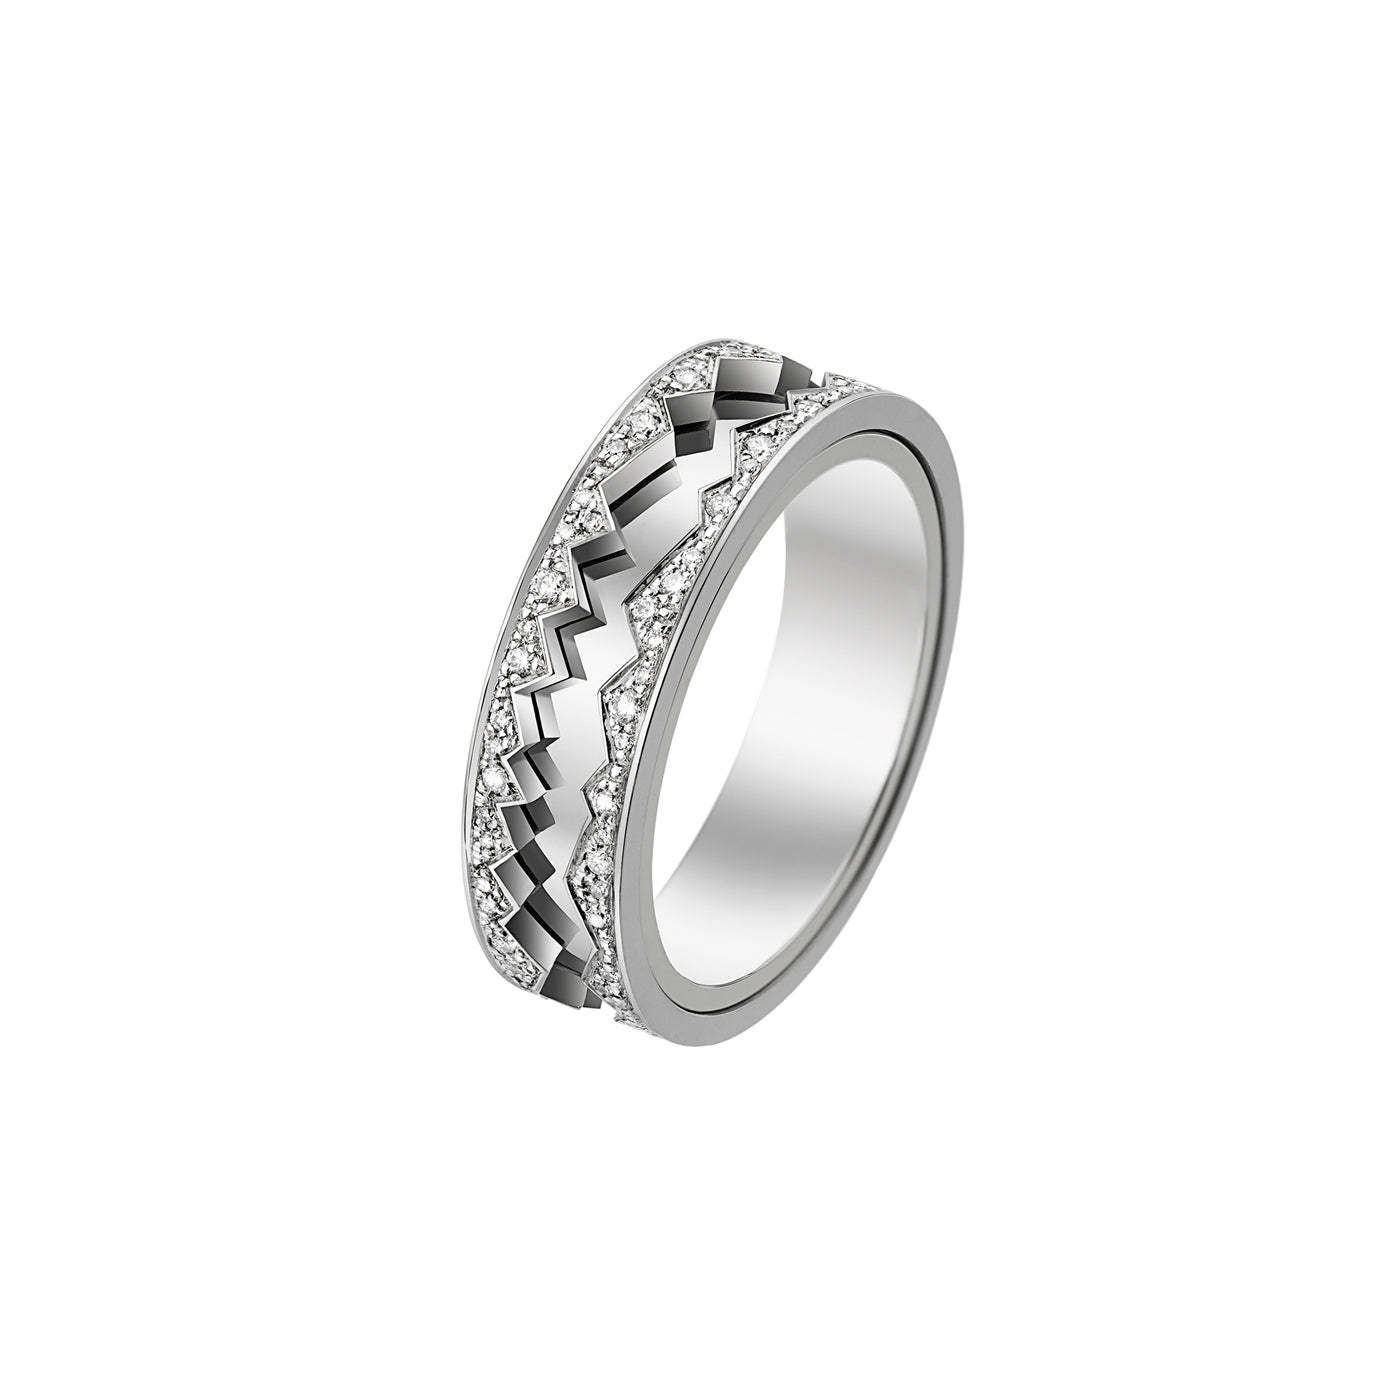 CAPTURE IN MOTION WHITE GOLD DIAMOND RING